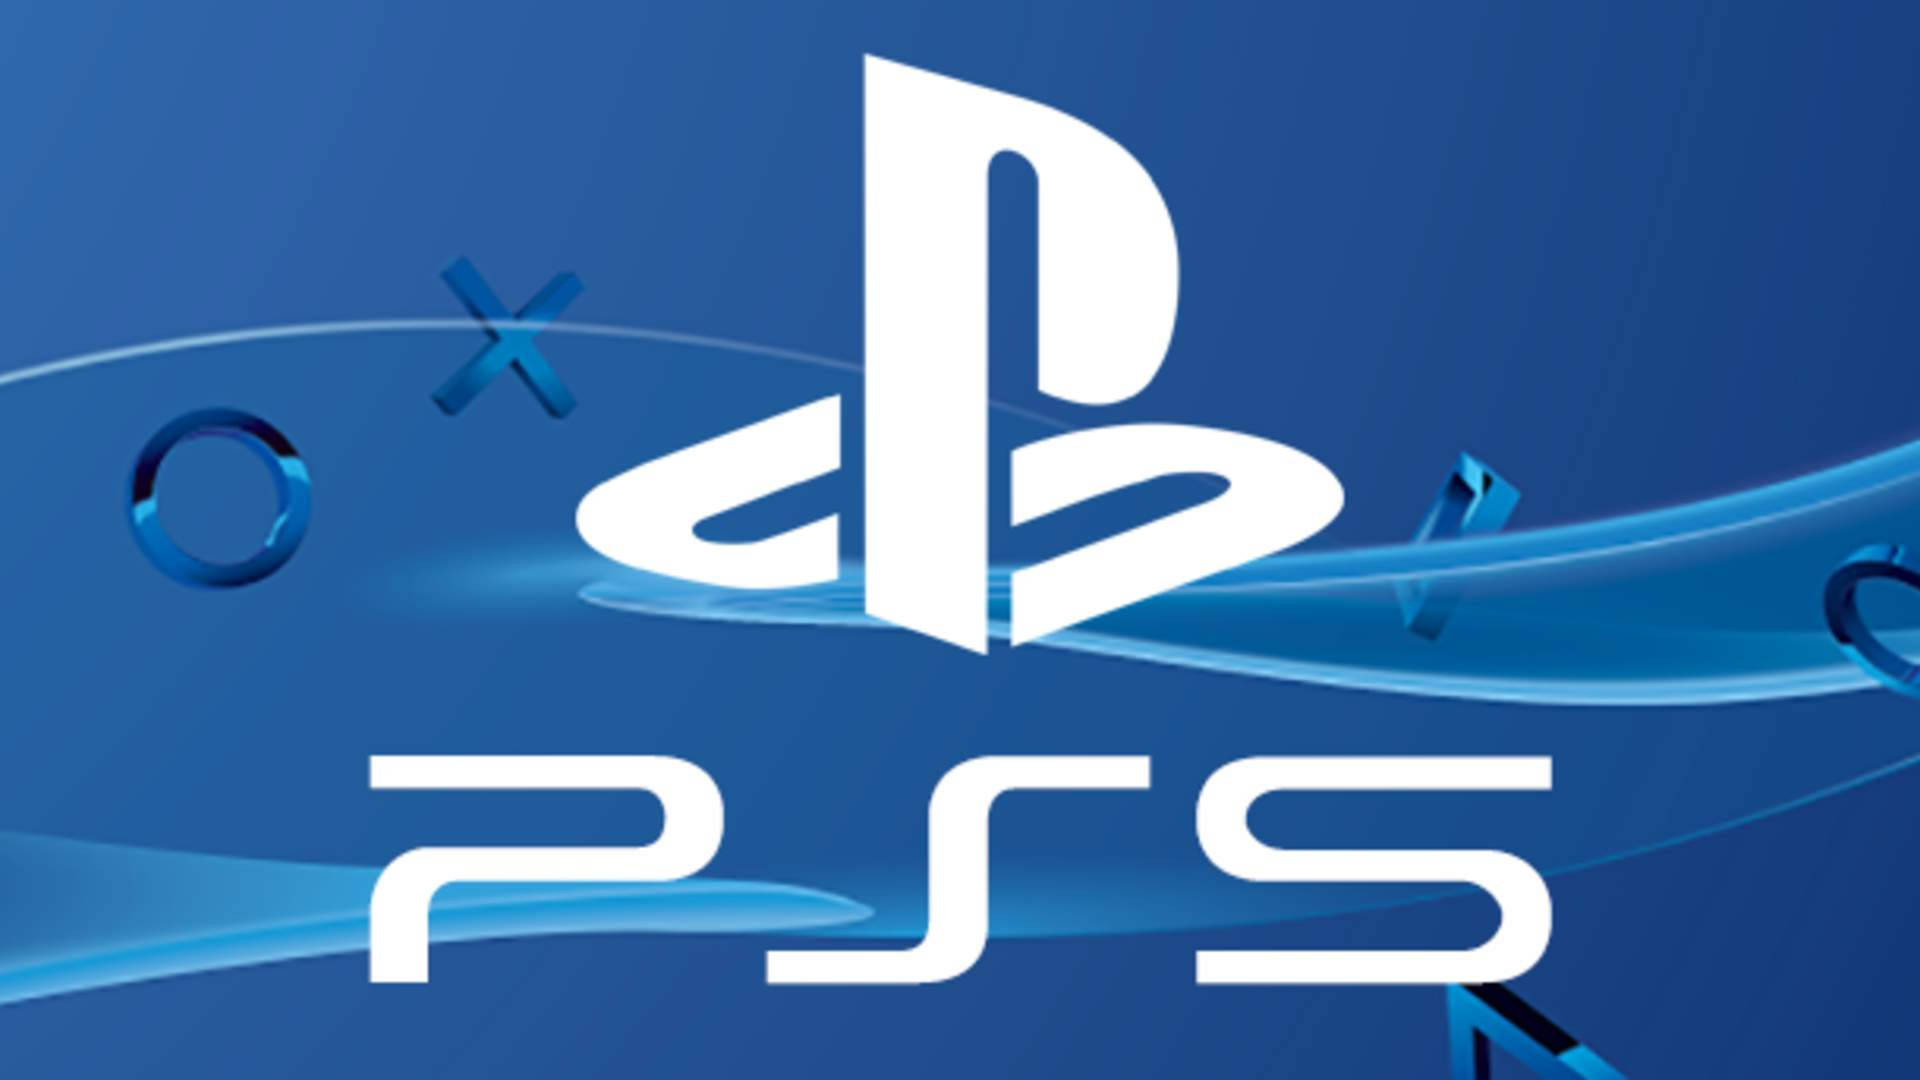 Playstation Ps5 Poster Background